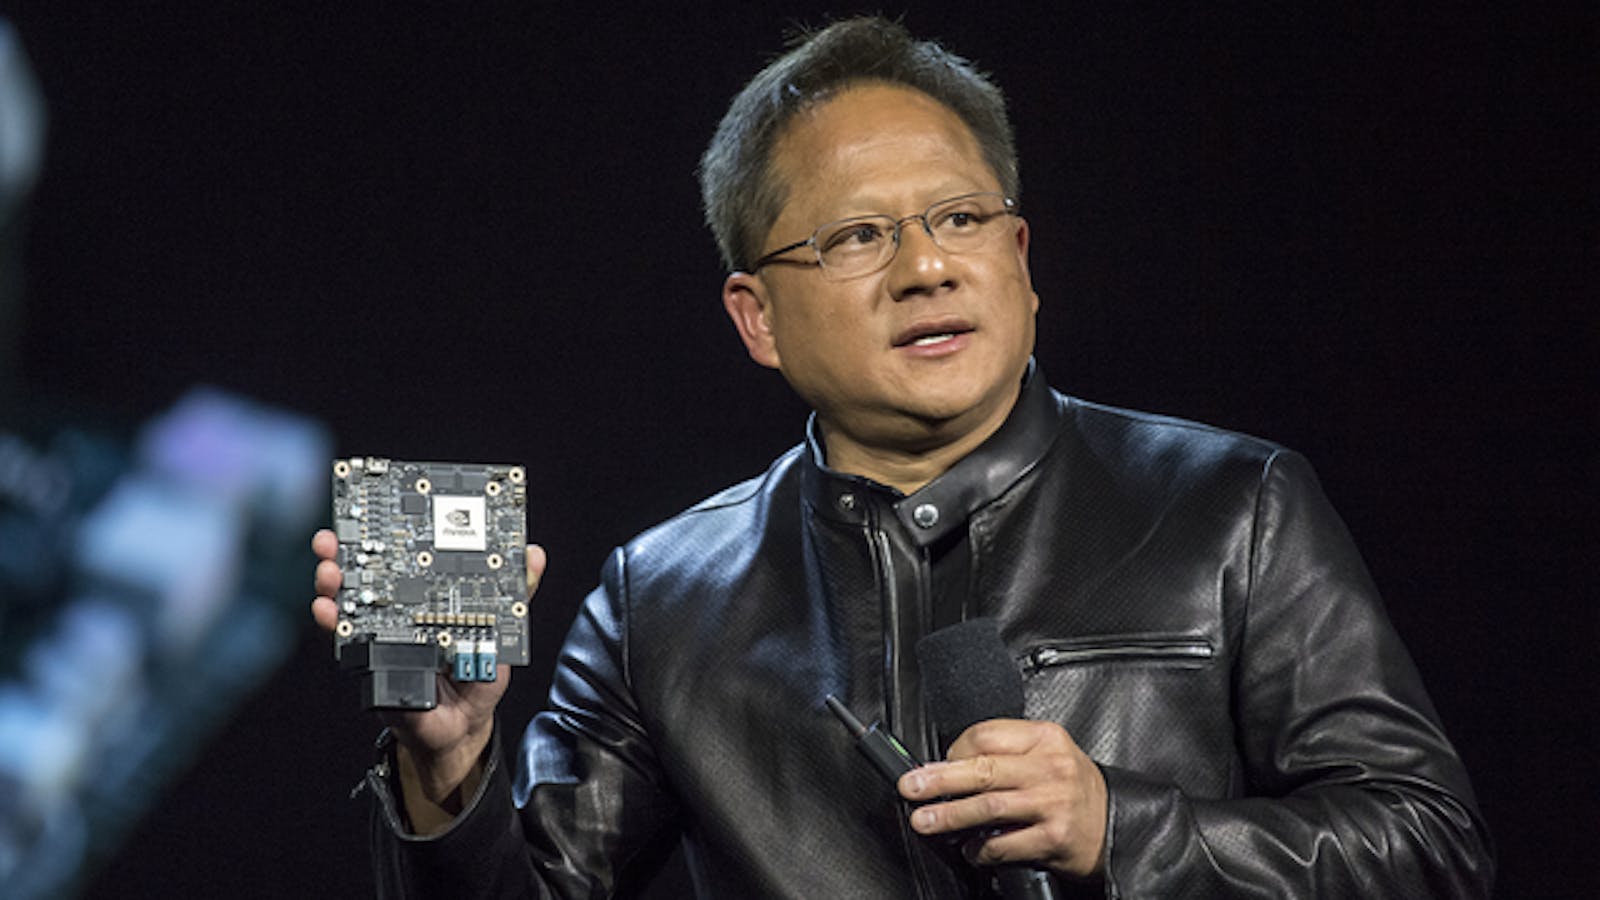 Nvidia CEO Jen-Hsun Huang, speaking at the 2017 Consumer Electronics Show in Las Vegas. Photo: Bloomberg